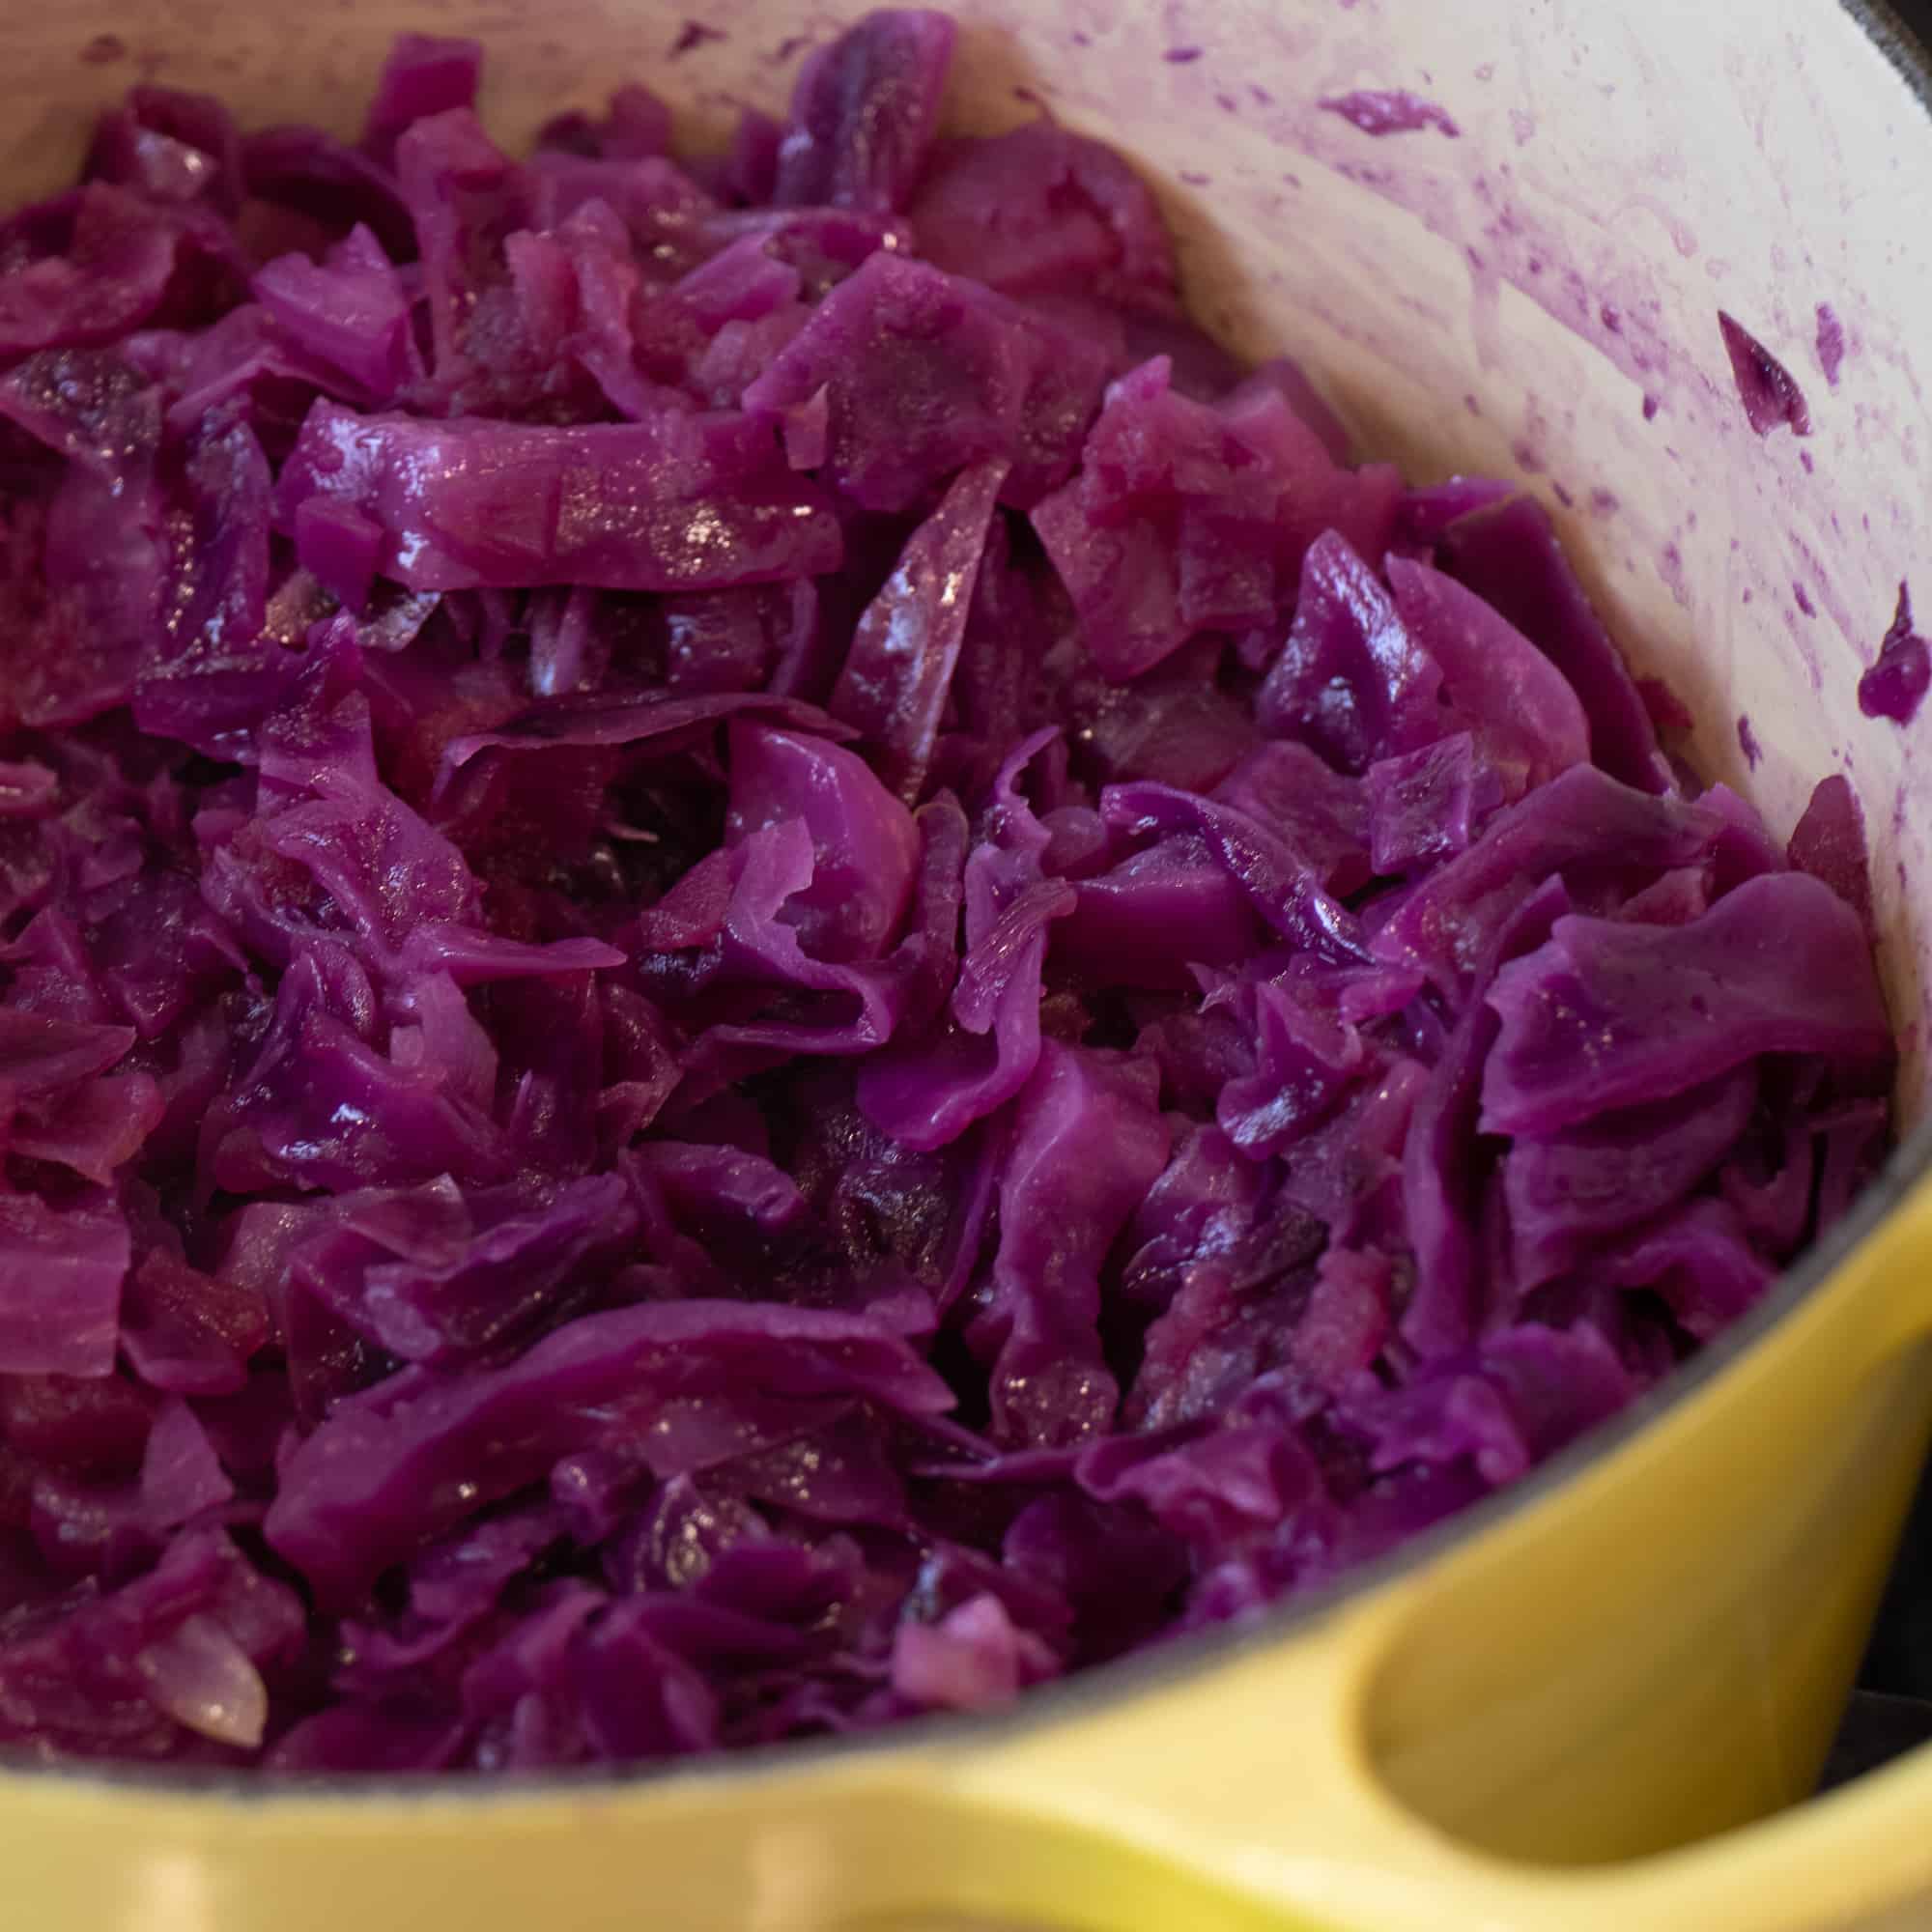 After the cabbage and apples have simmered on the stove for 45 to 60 minutes, the colour is a deep purple and the cabbage is soft and sweet.